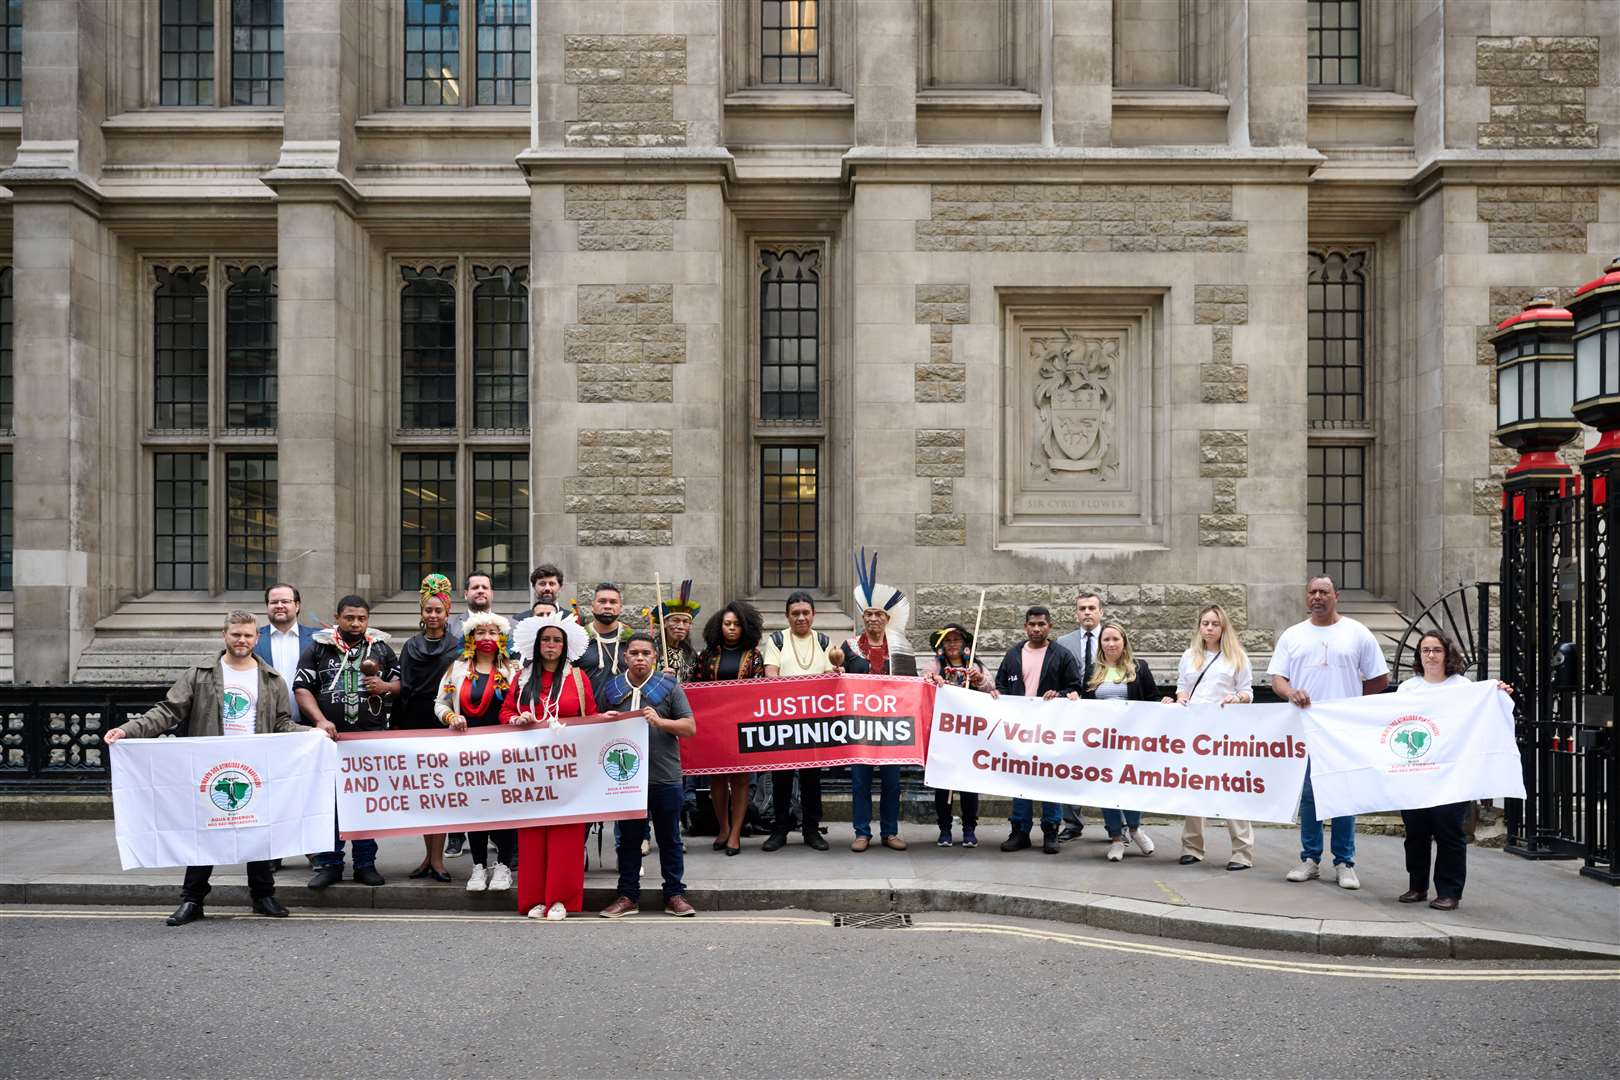 Indigenous communities protest outside the High Court in London (Matt Pover)